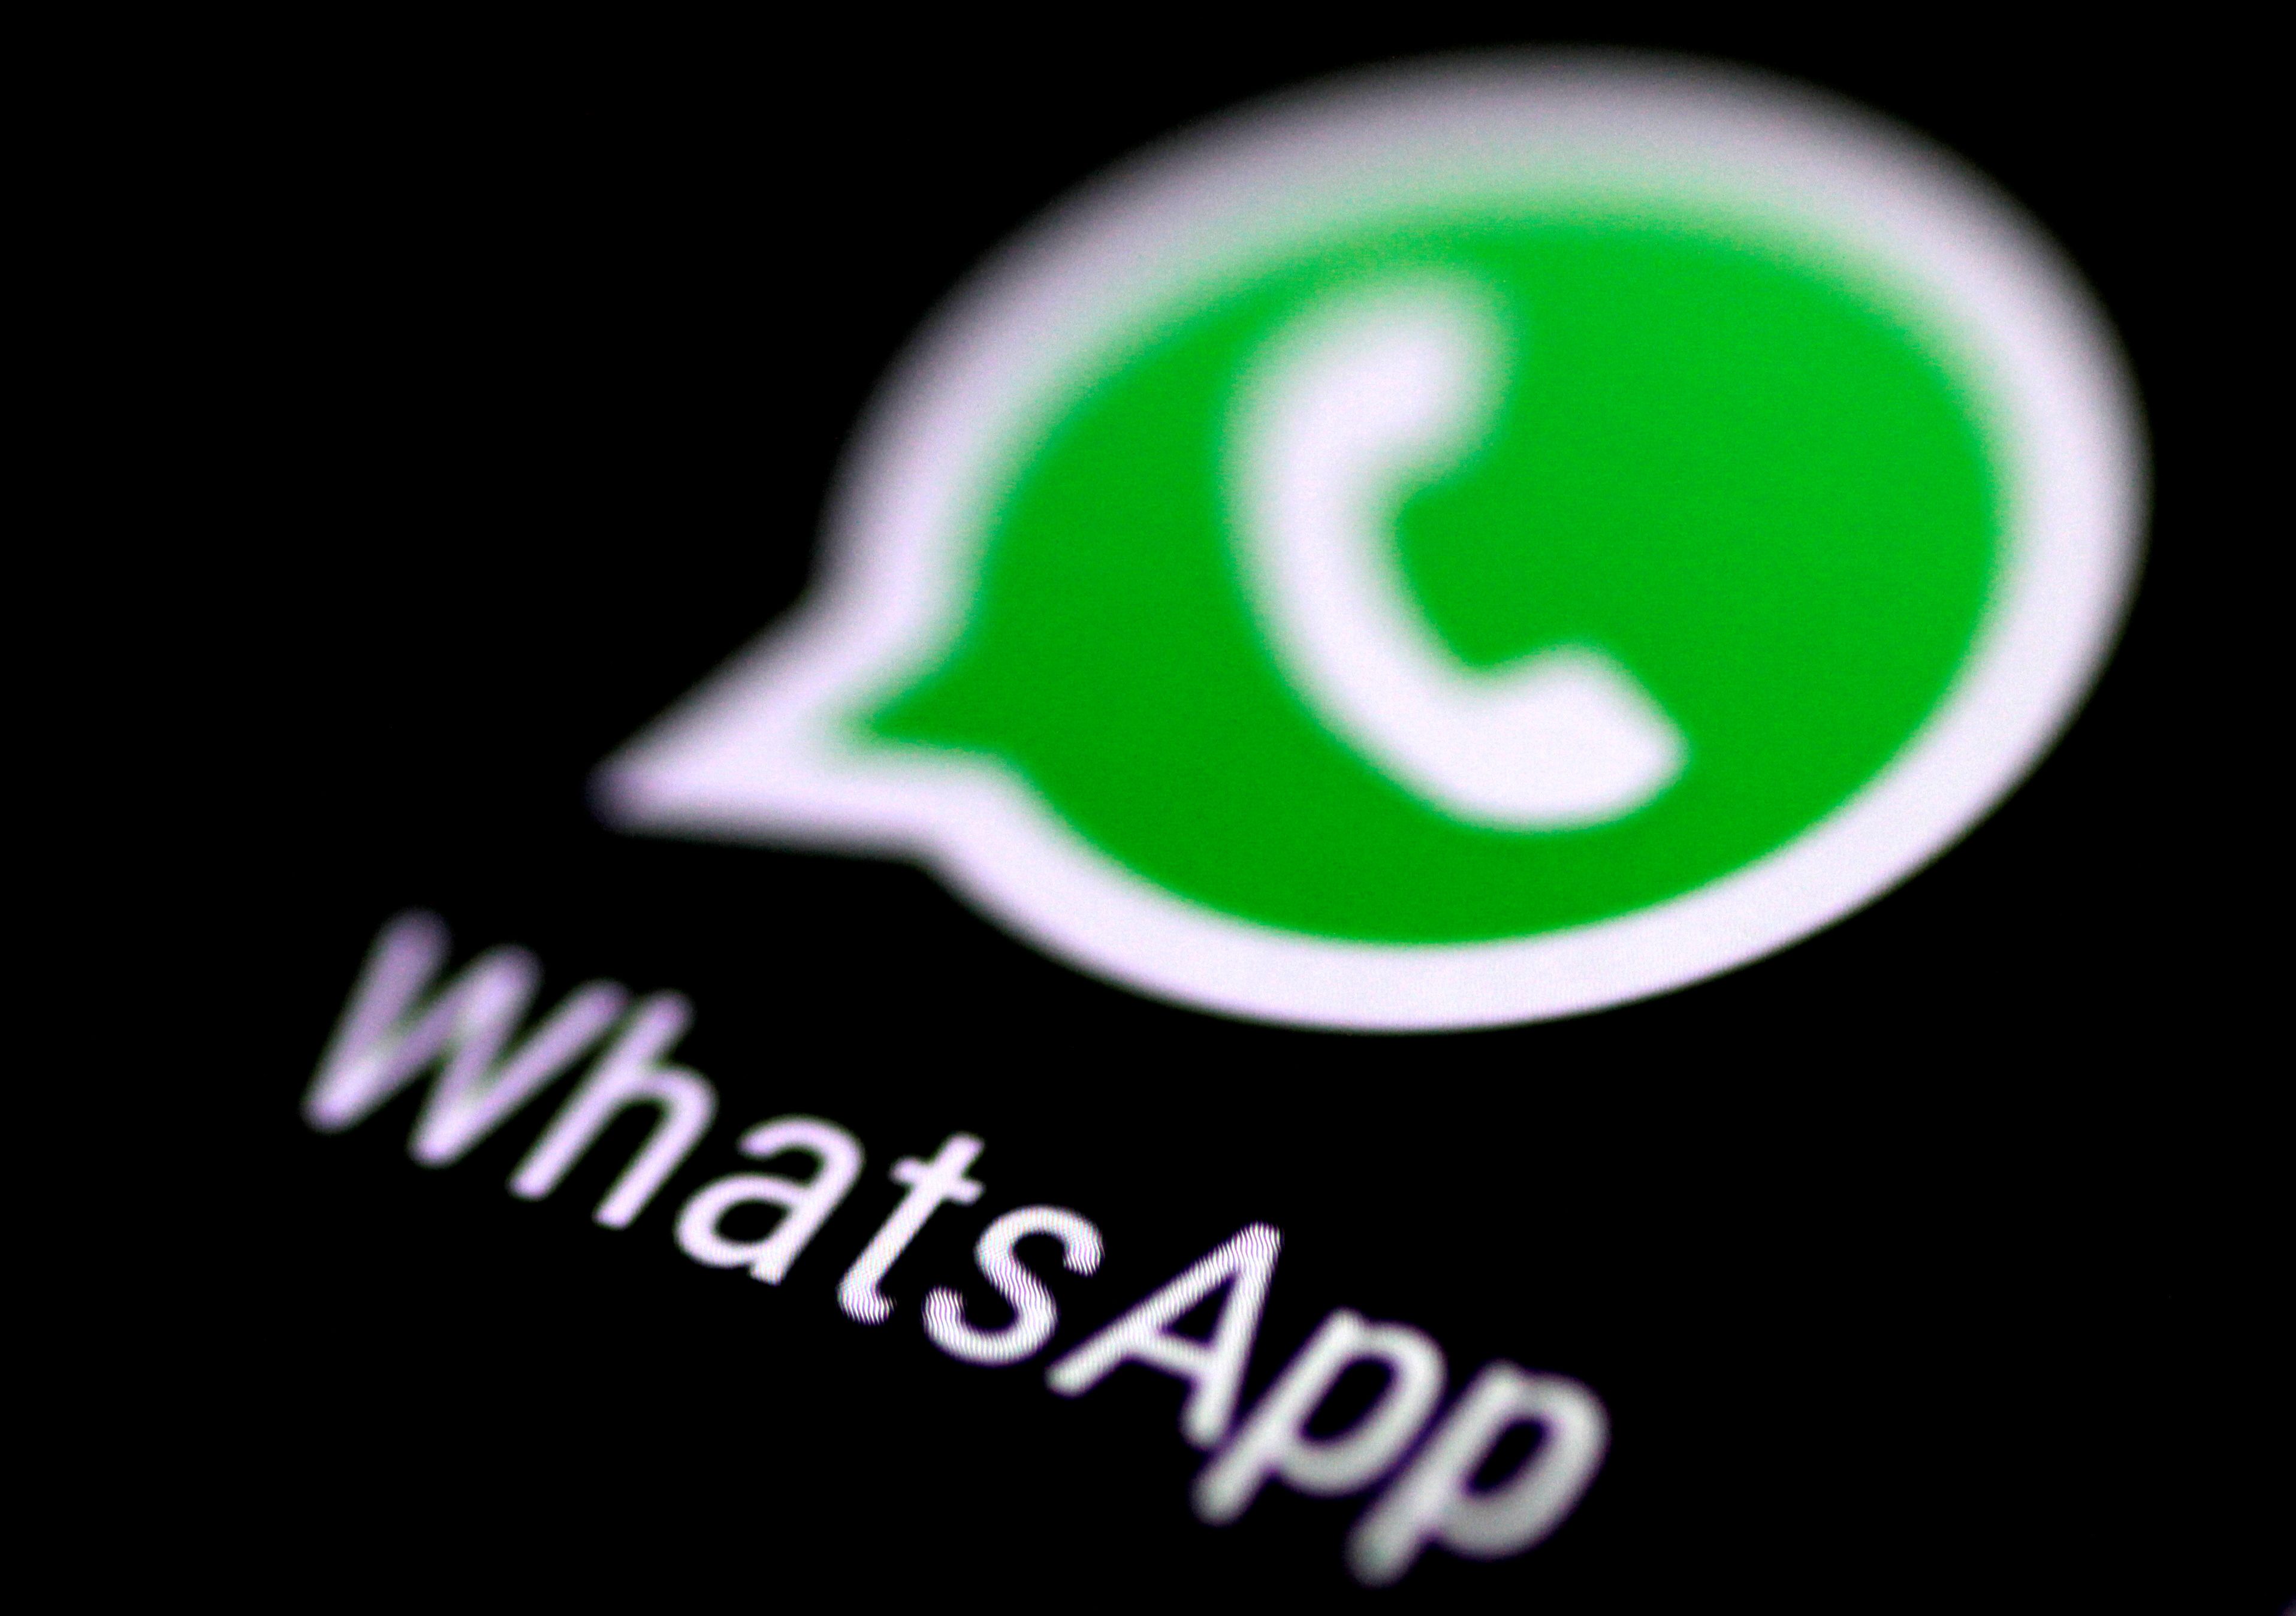 India antitrust watchdog orders probe into WhatsApp’s new privacy policy